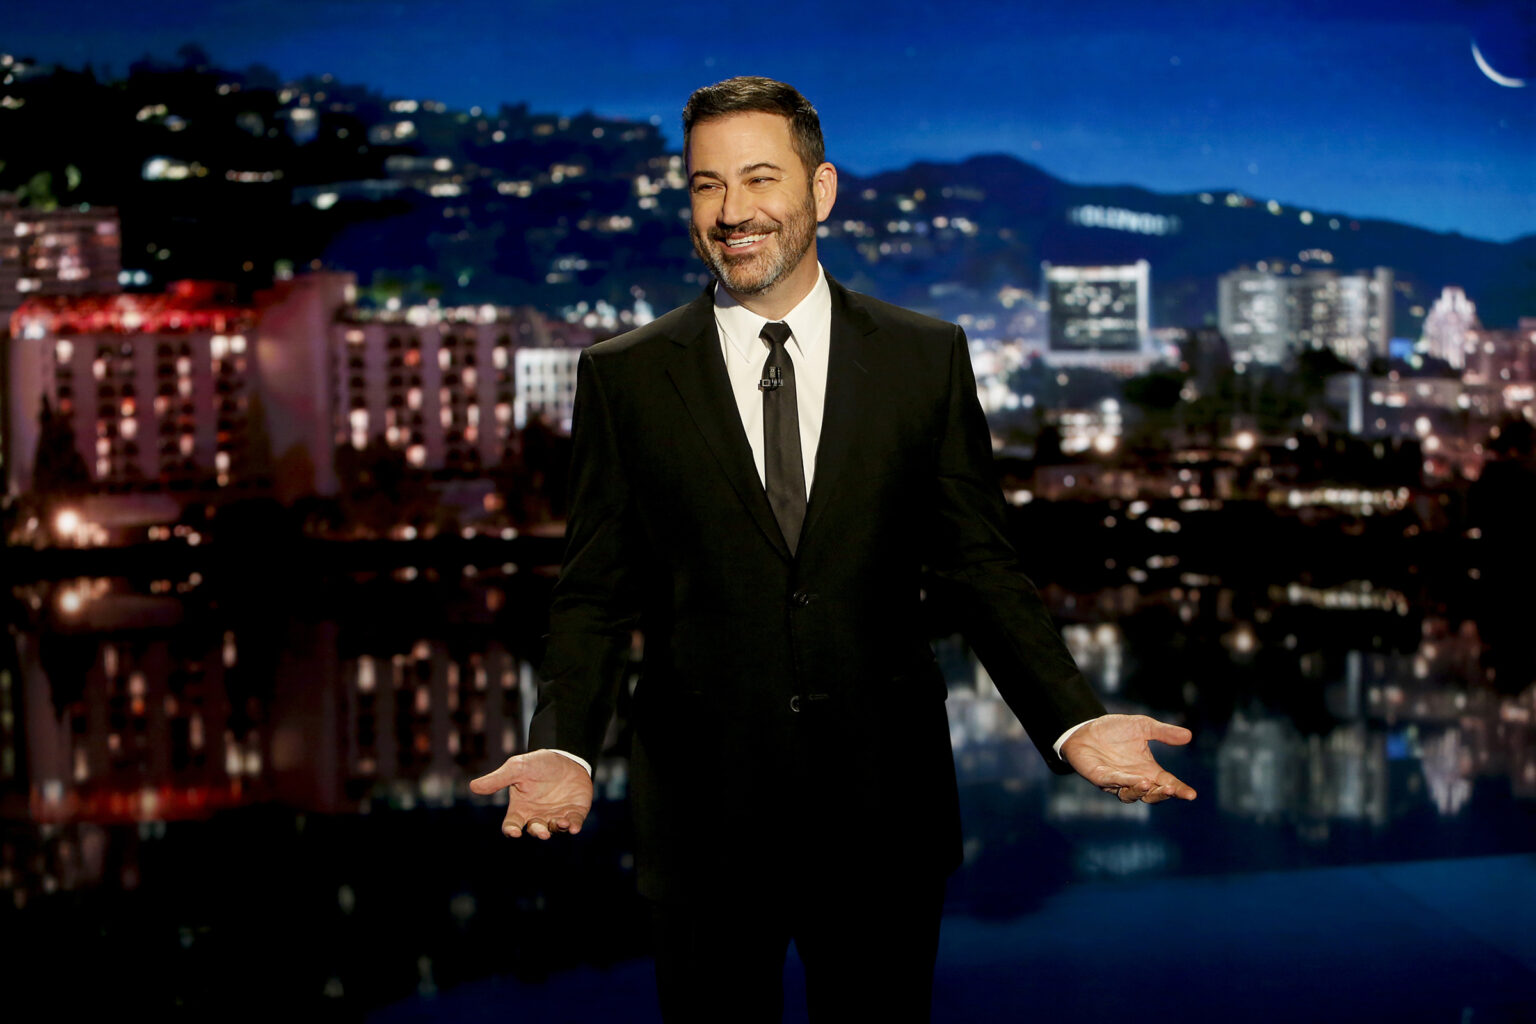 'Jimmy Kimmel Live' incorrectly has a reputation for being the nicer of the late night talk shows. These bad interview prove the exact opposite.